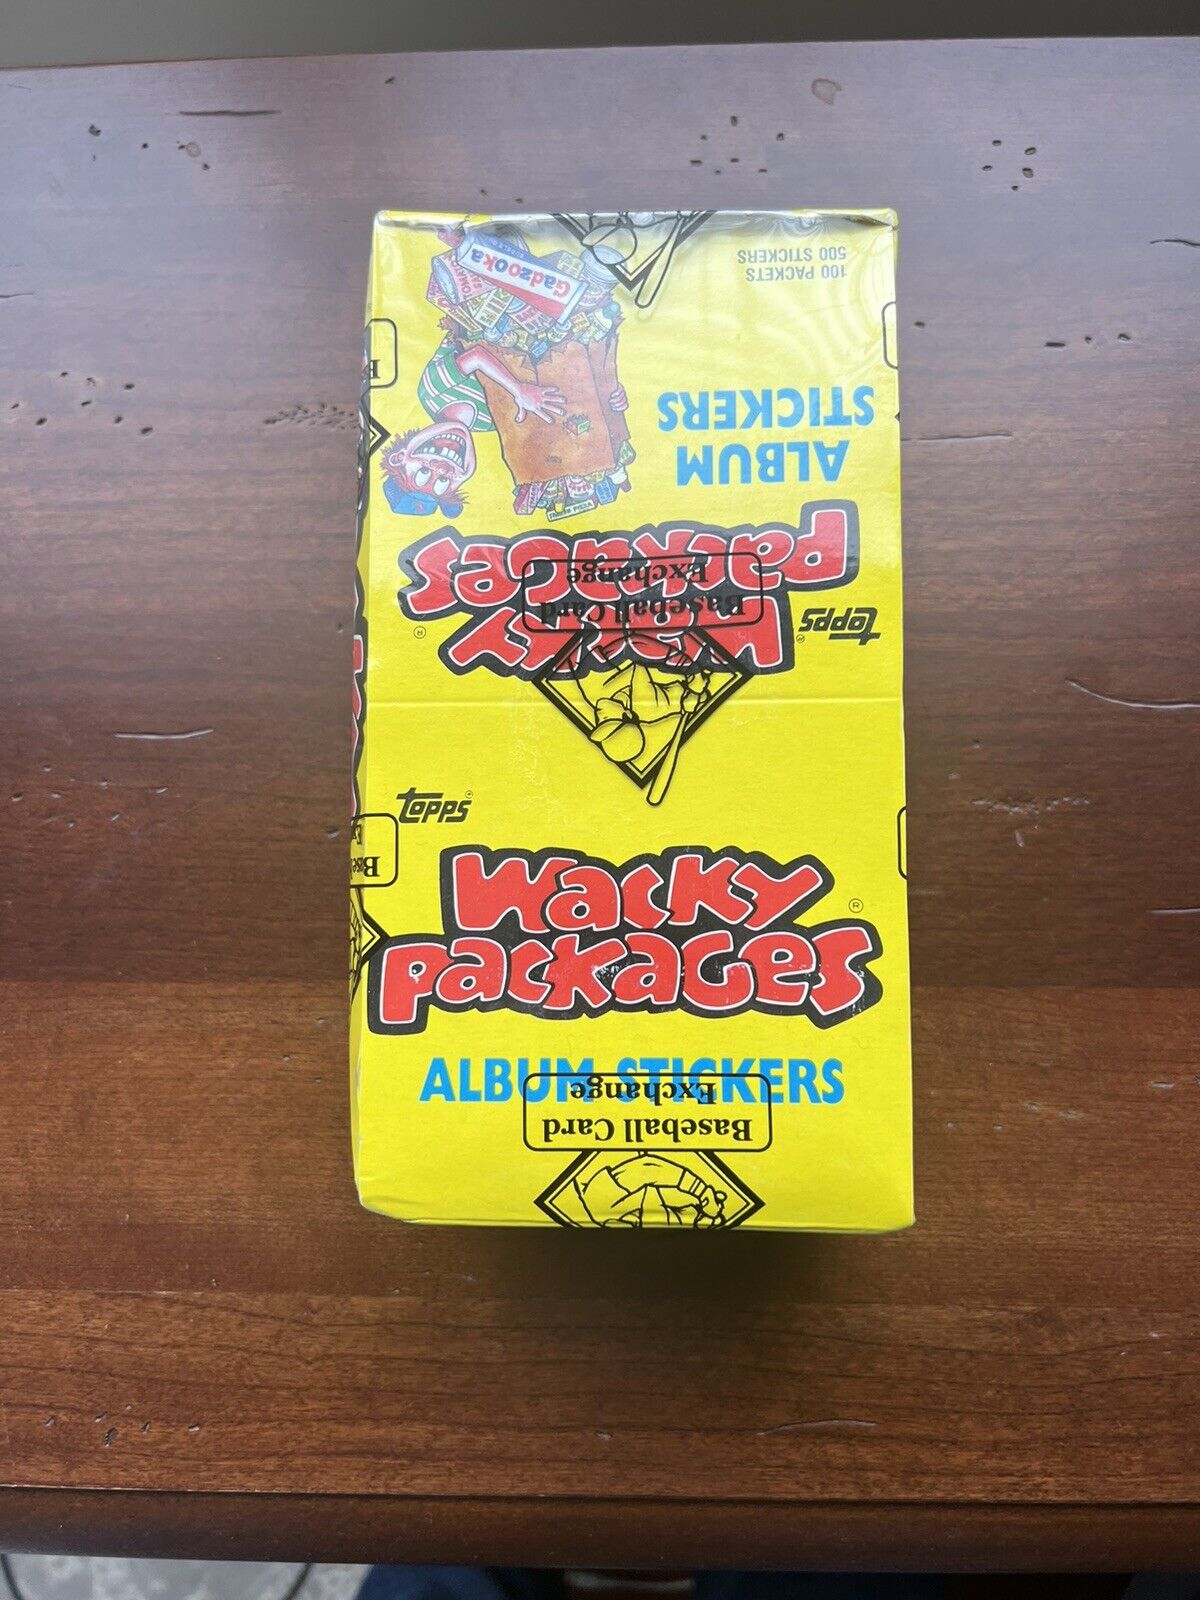 1986 Topps Wacky Packages ALBUM STICKERS Wax Box 100 packs BBCE 